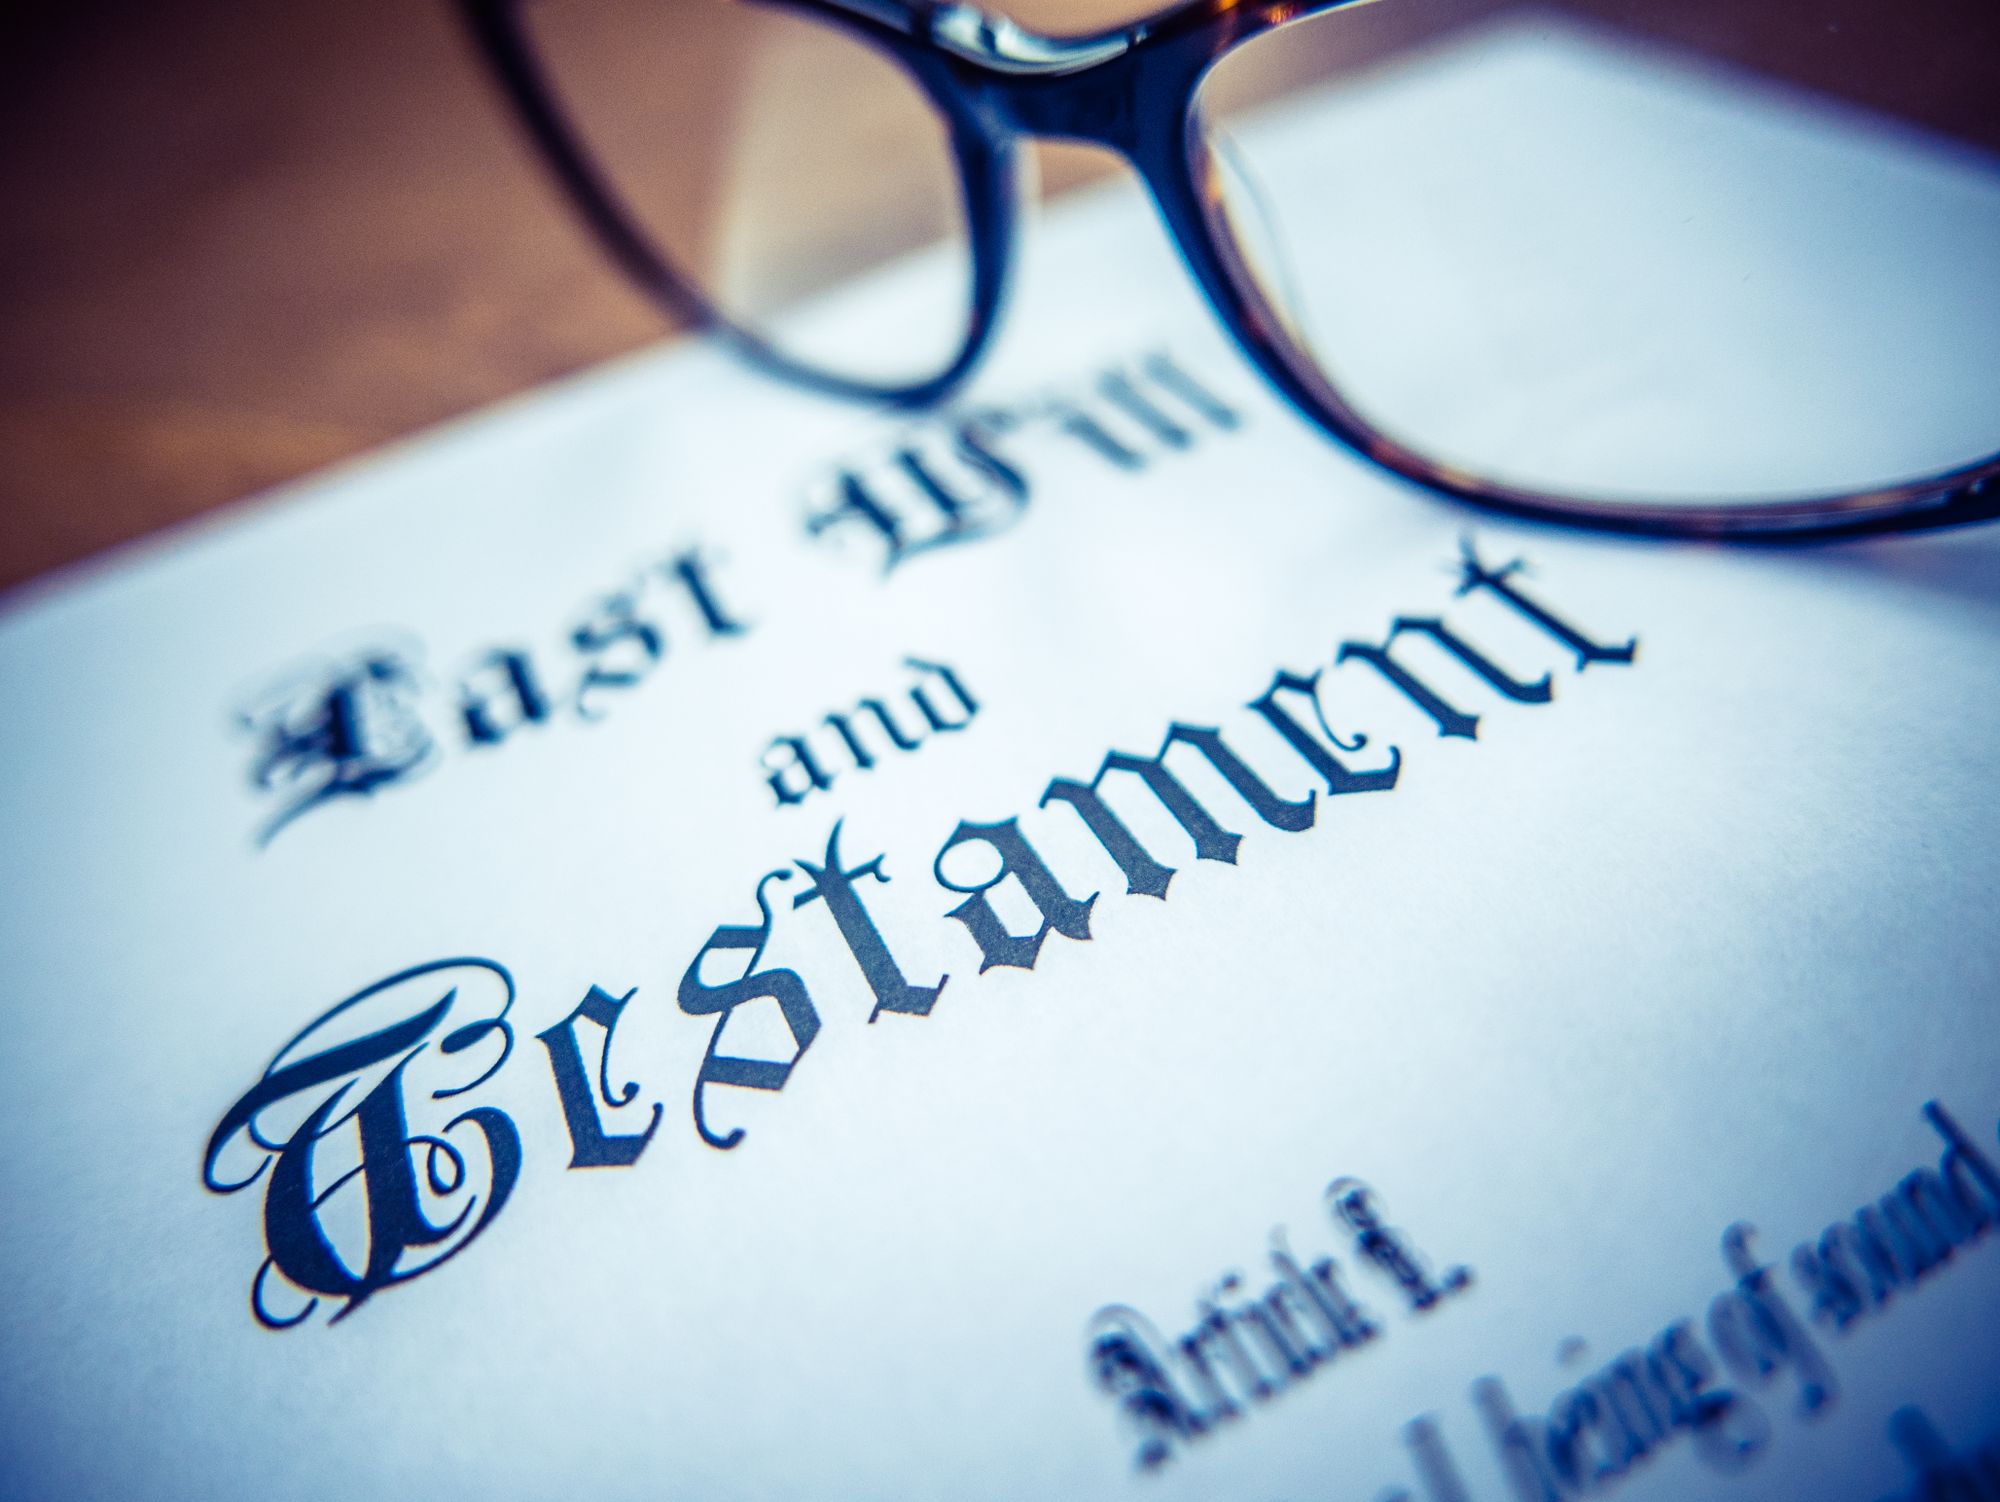 Not having a Will can pose serious consequences for your loved ones.